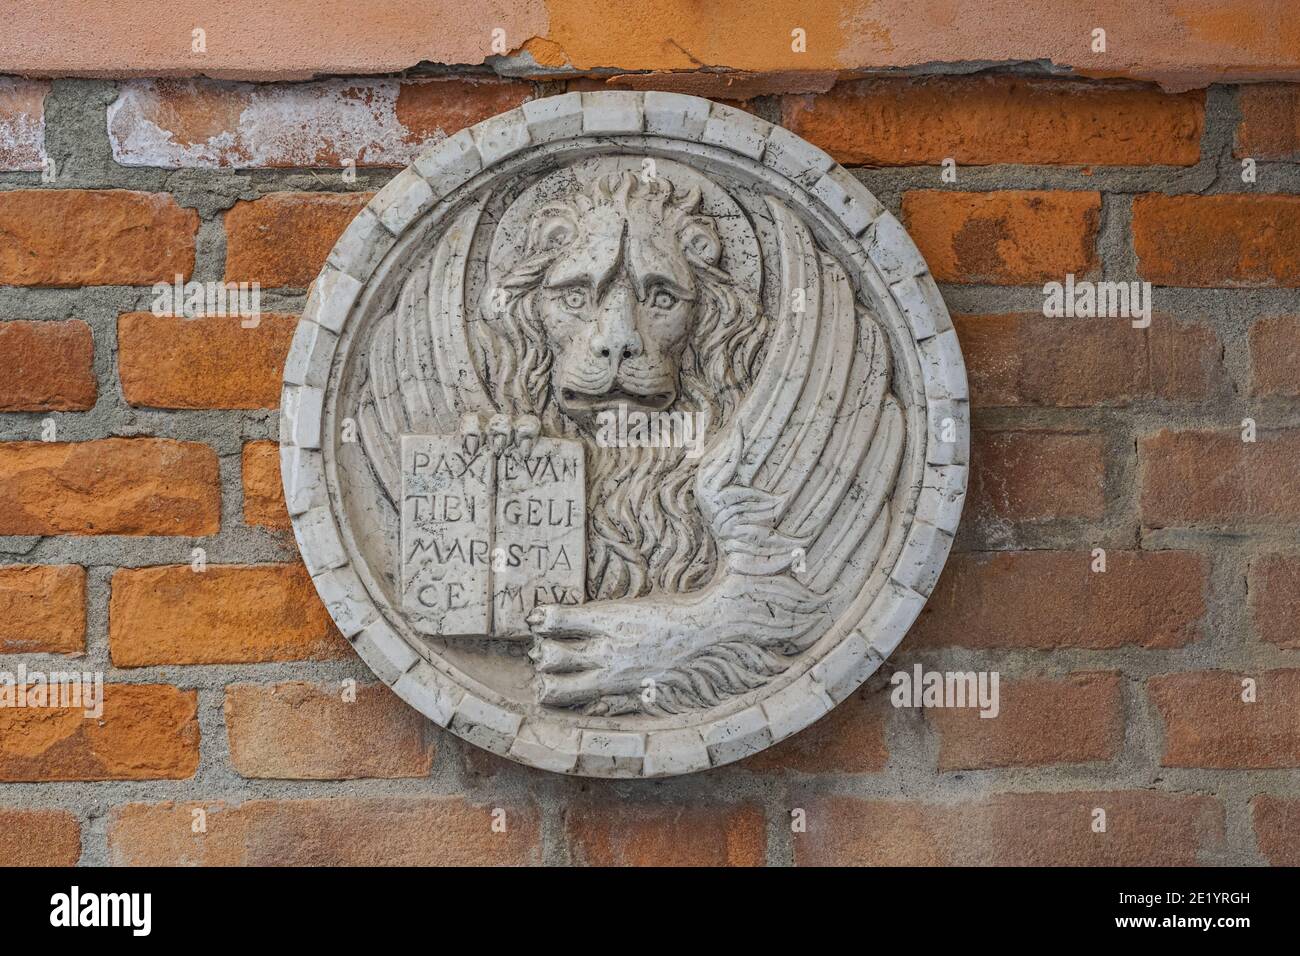 Lion of Saint Mark relief on the wall of a building in Venice, Italy Stock Photo